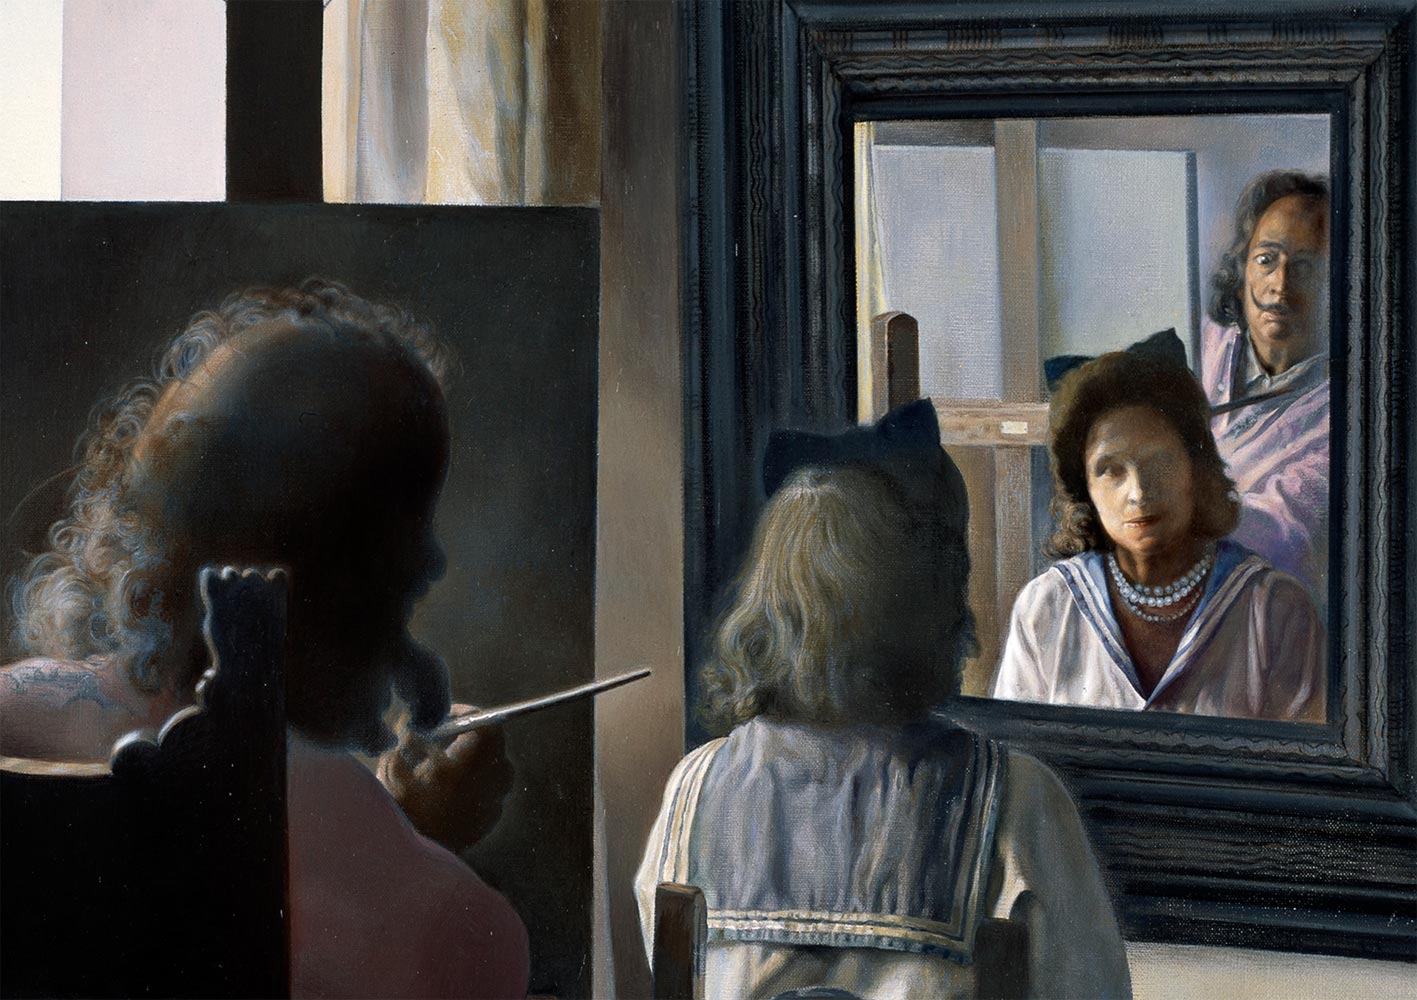 Dali from the back painting Gala from the back eternalized by six virtual corneas provisionally reflected in six real mirrors - 1973 detail